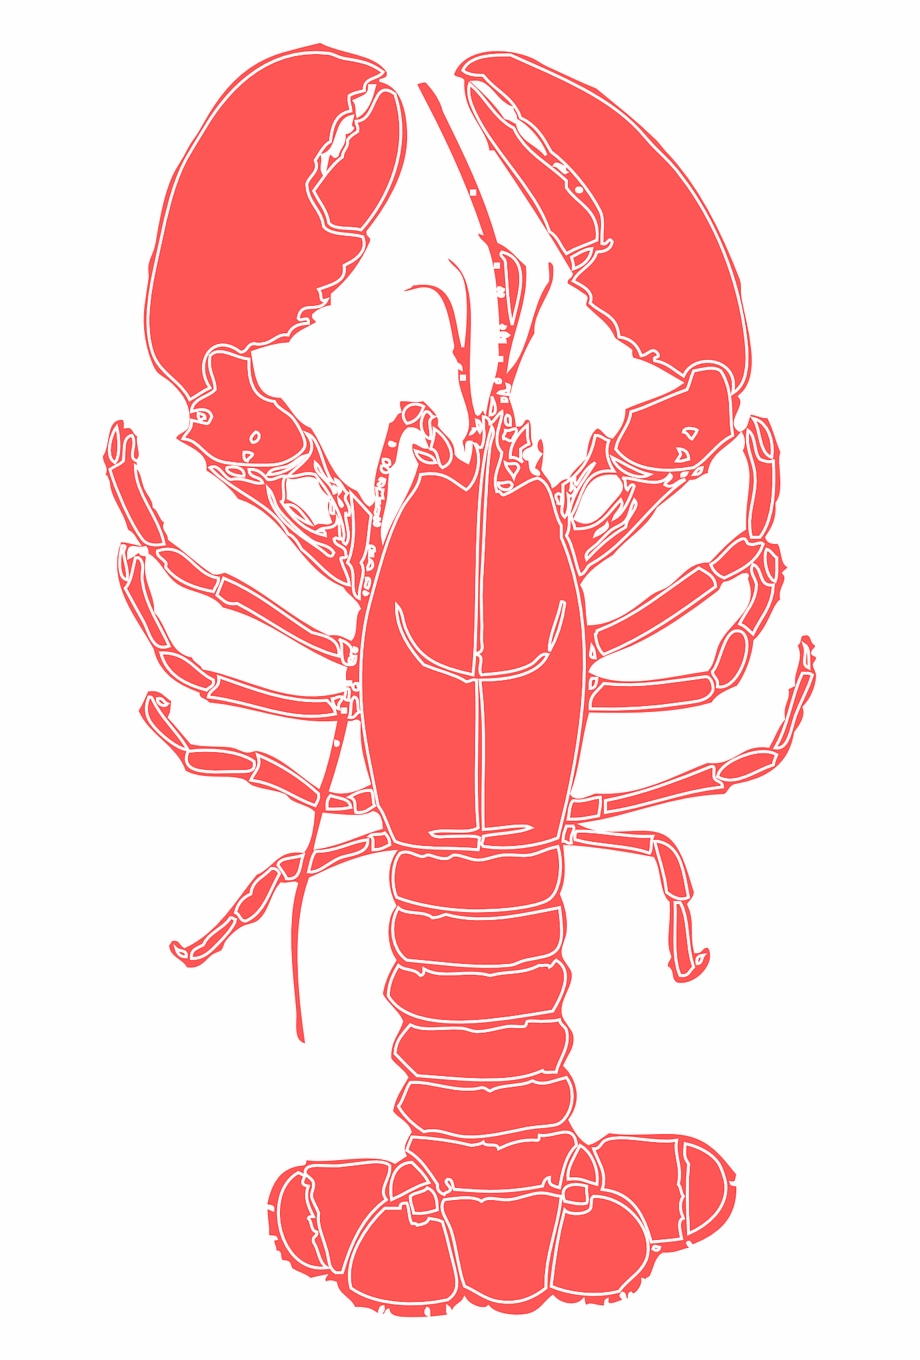 Lobster Crustacean Crab Crayfish Png Image Lobster Clipart